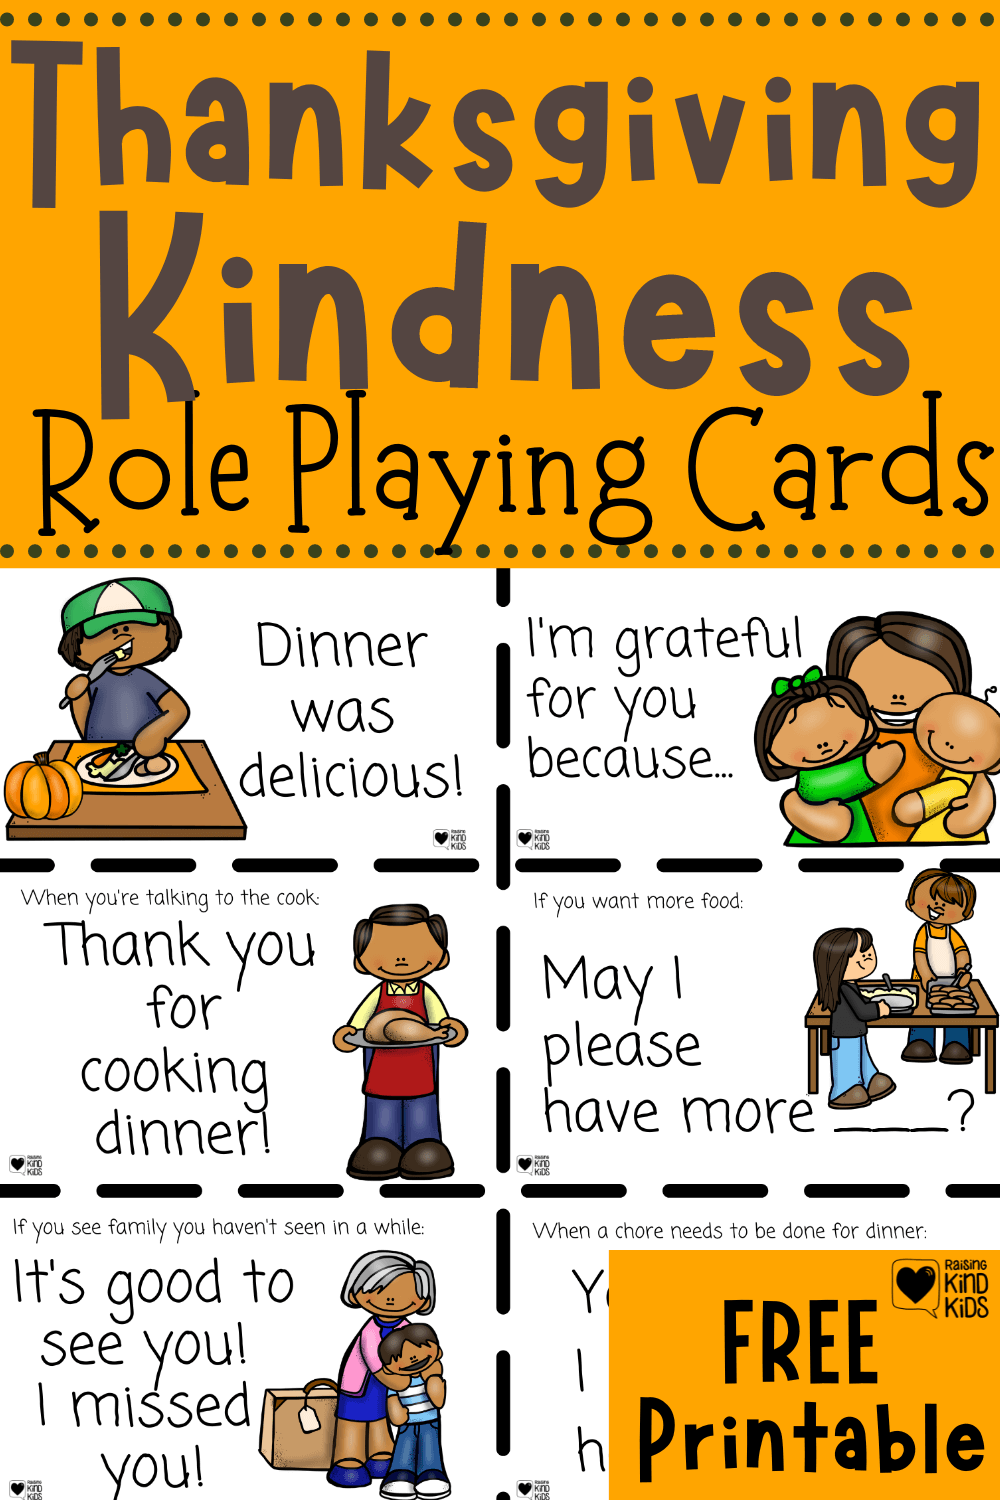 Use these Thanksgiving kindness role playing cards to help intentionally teach kids to be kind and giving them time to practice. 